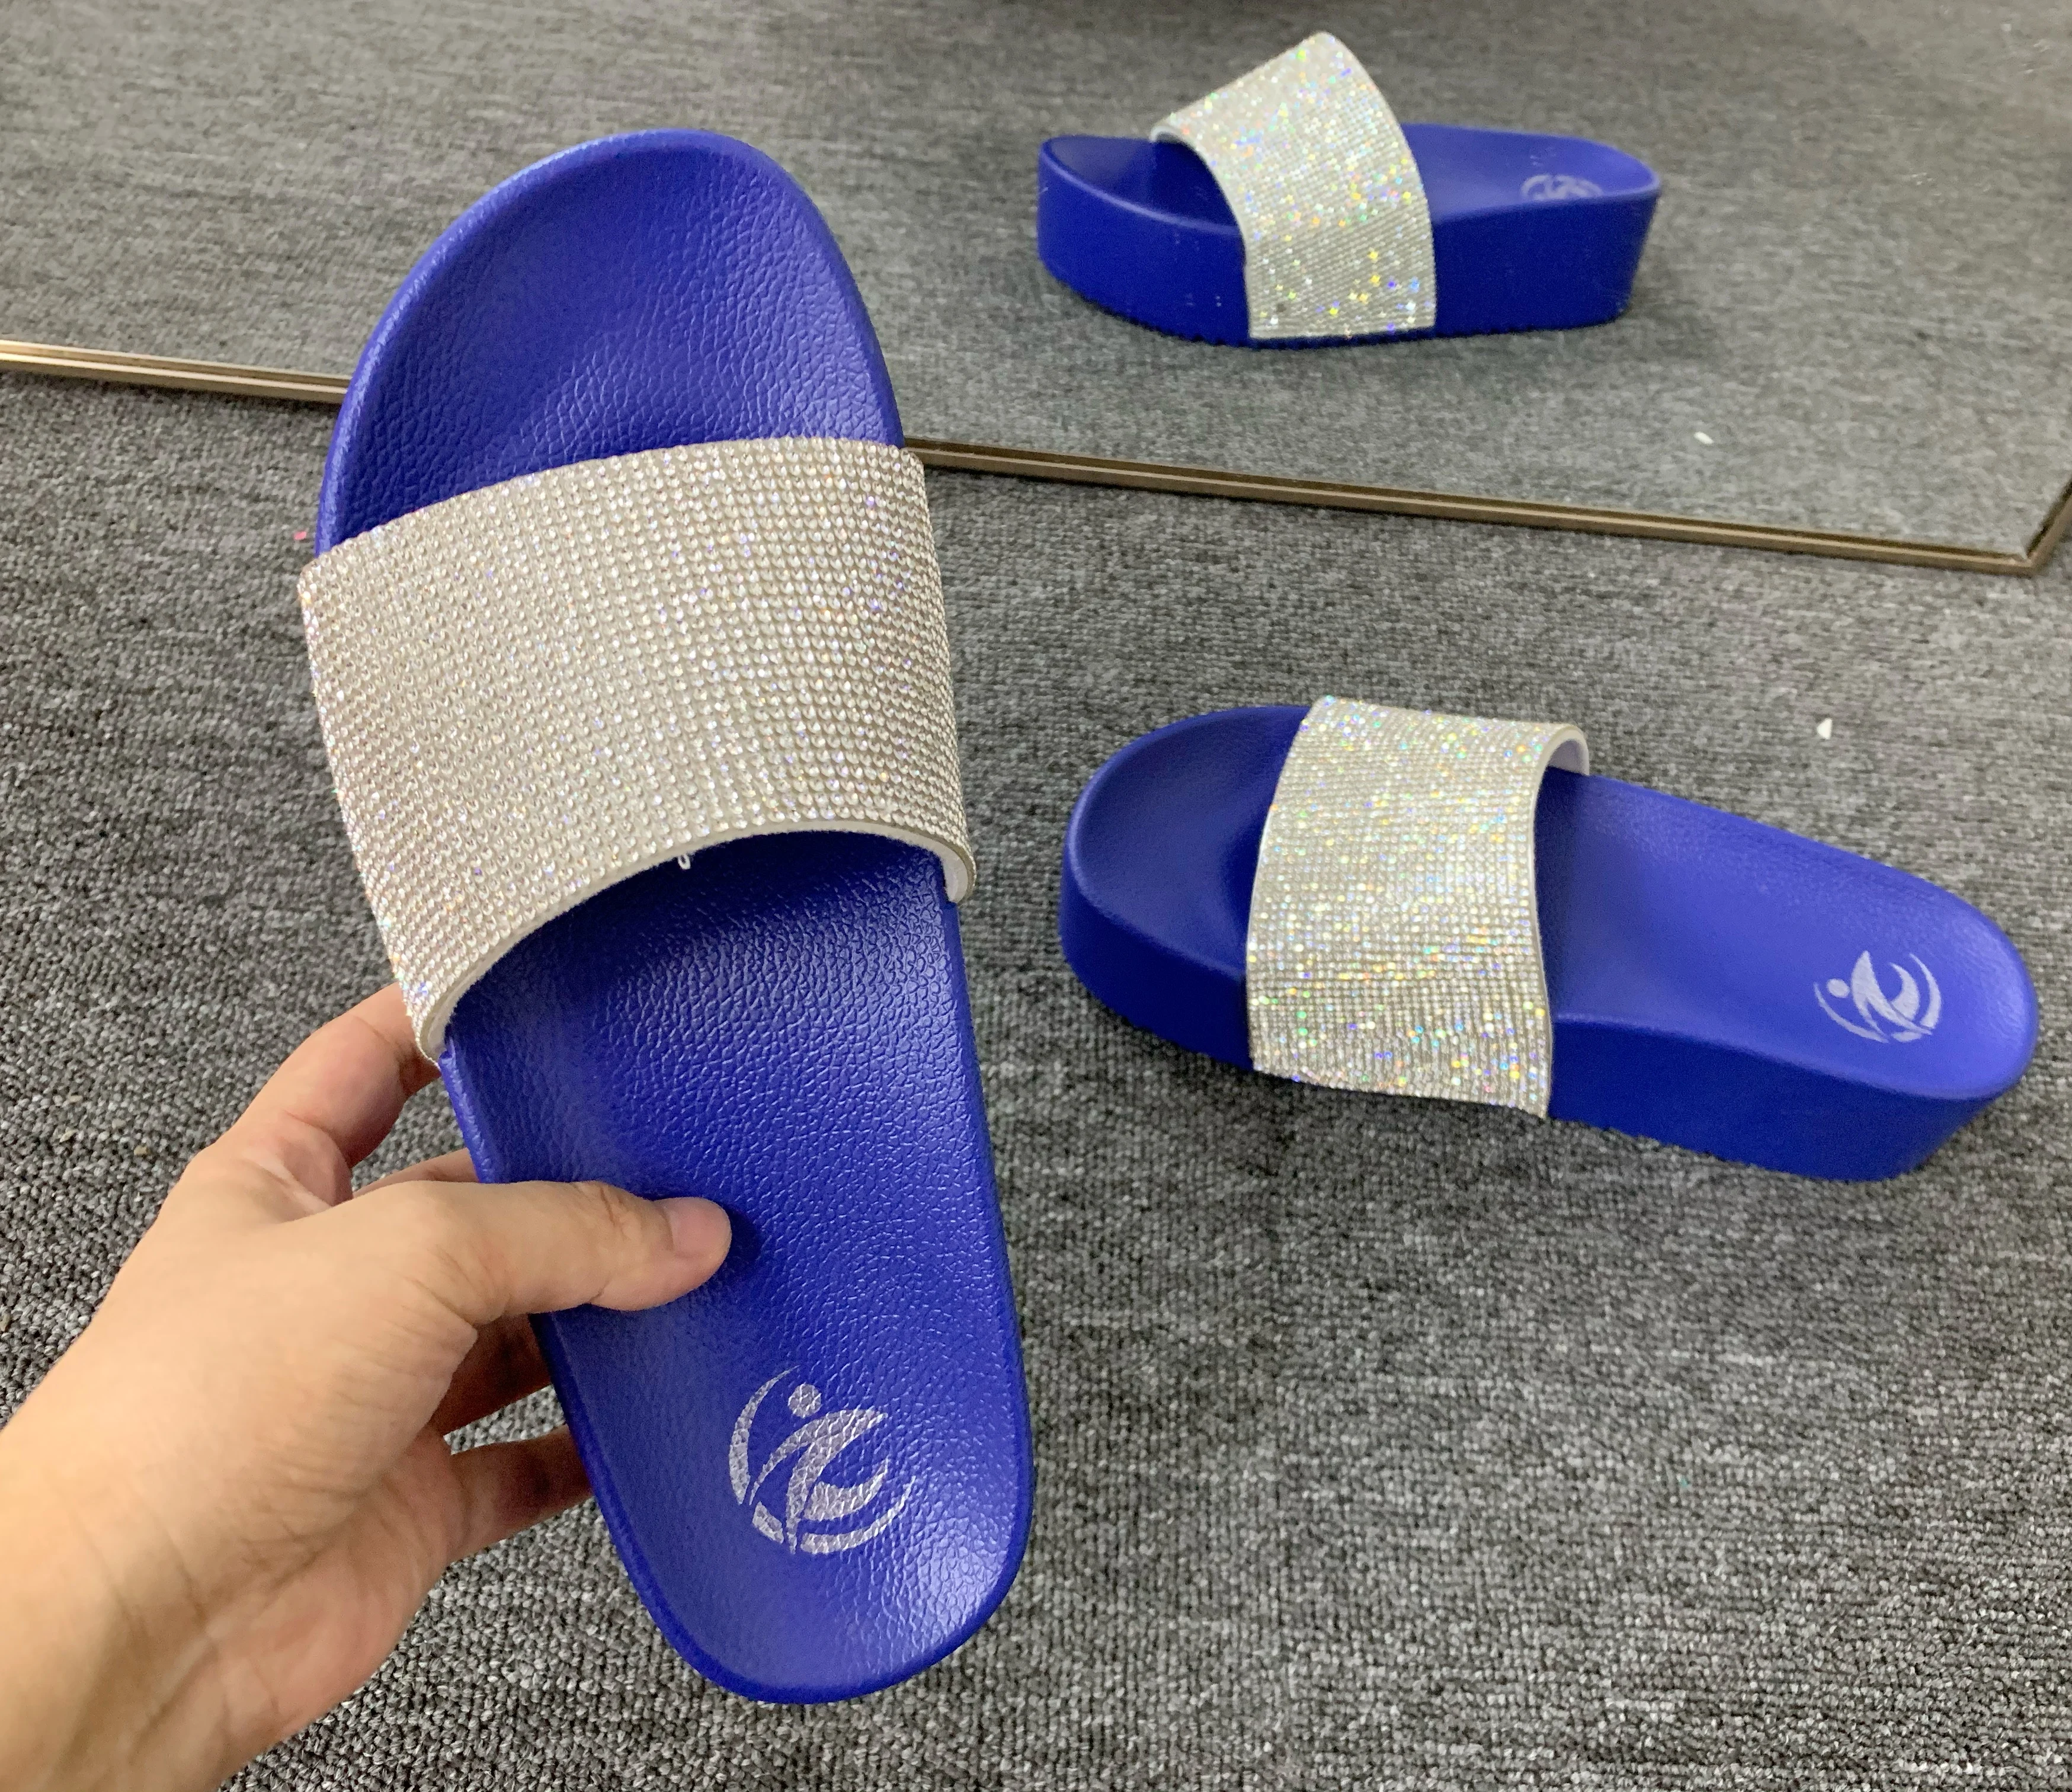 Blue Chappal/Slippers for Women's - Fashion Sandal (Size 6 & 8) - Finebuy